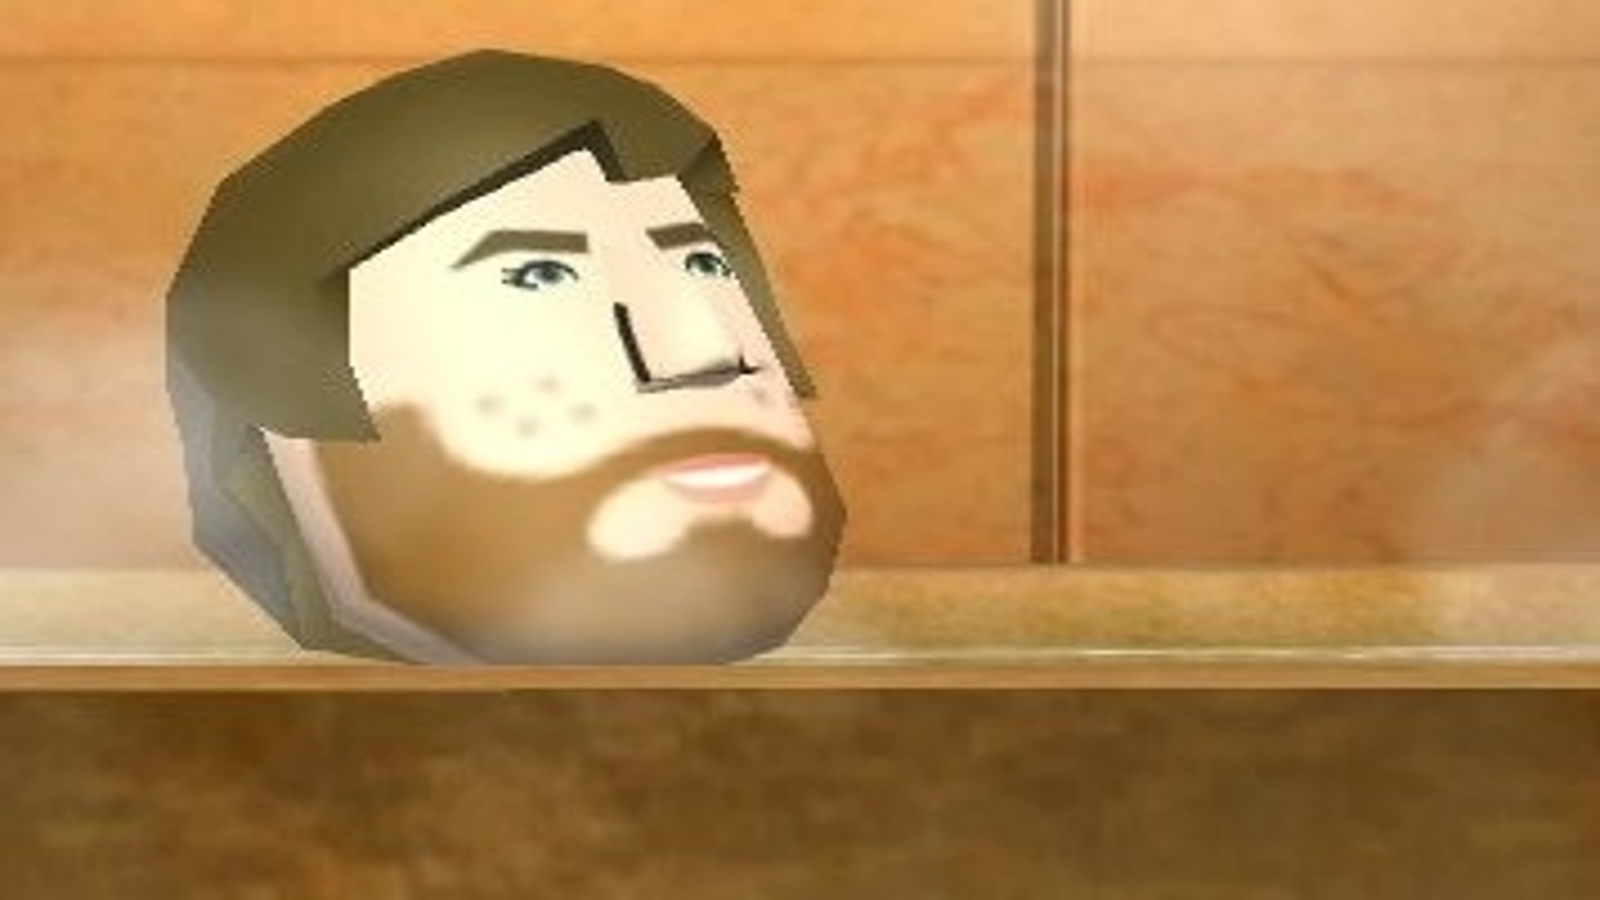 Review Tomodachi Life